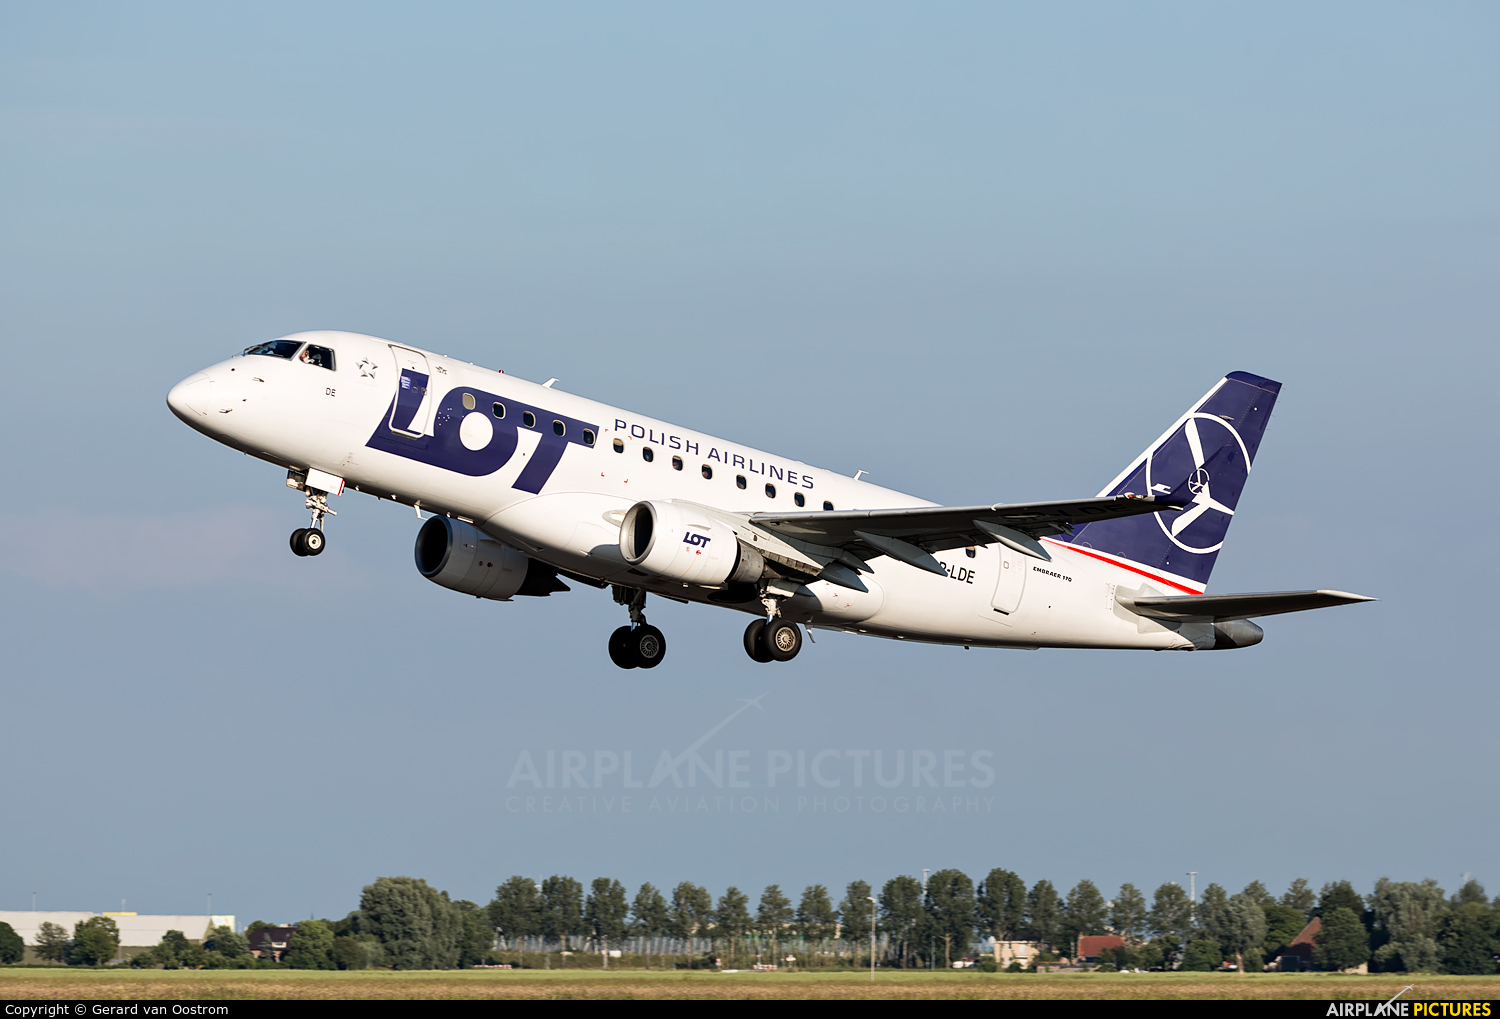 LOT - Polish Airlines SP-LDE aircraft at Amsterdam - Schiphol